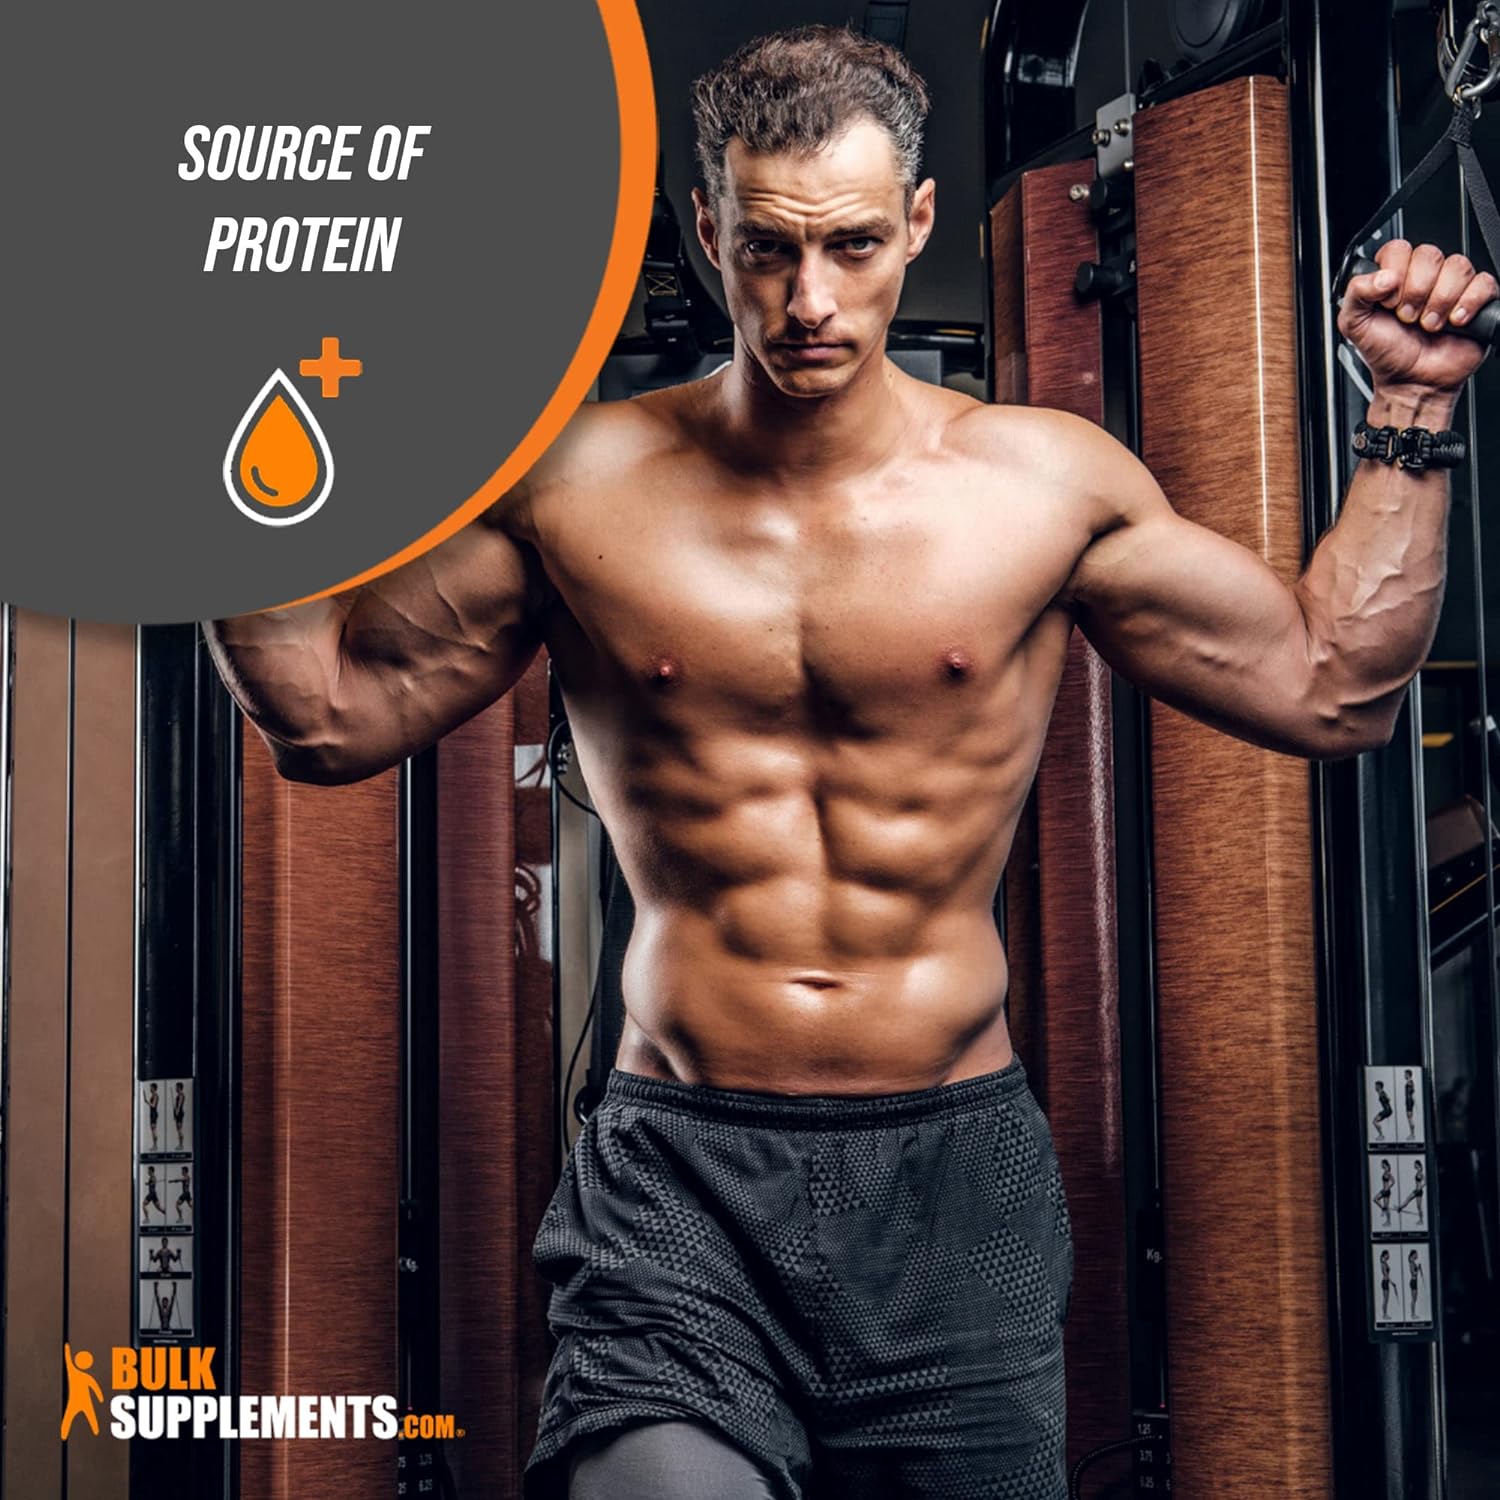 BULKSUPPLEMENTS.COM Soy Protein Isolate Powder - Unflavored, No Sugar 